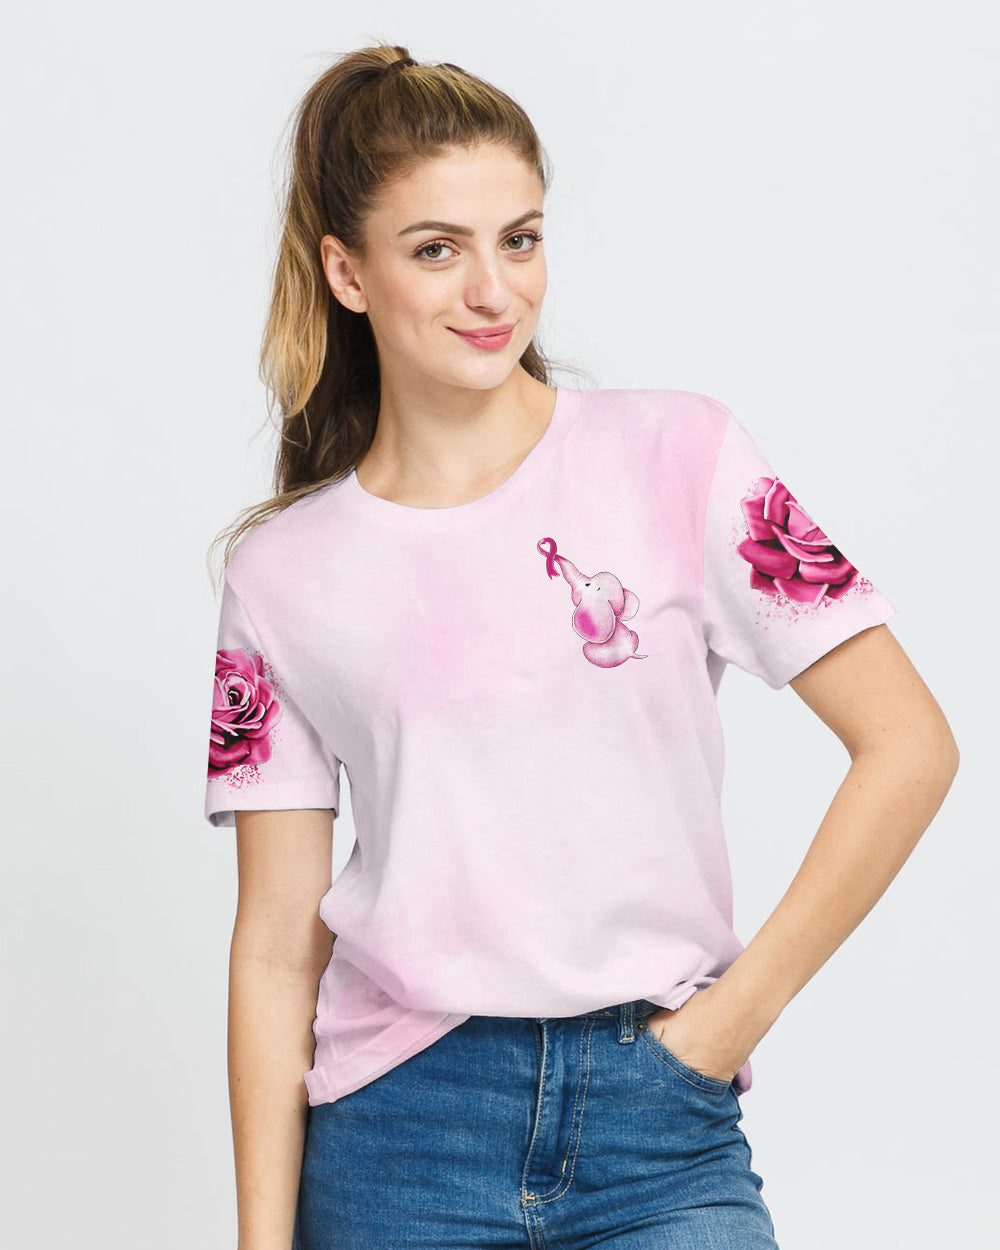 Never Give Up Rose Elephant Women's Breast Cancer Awareness Tshirt